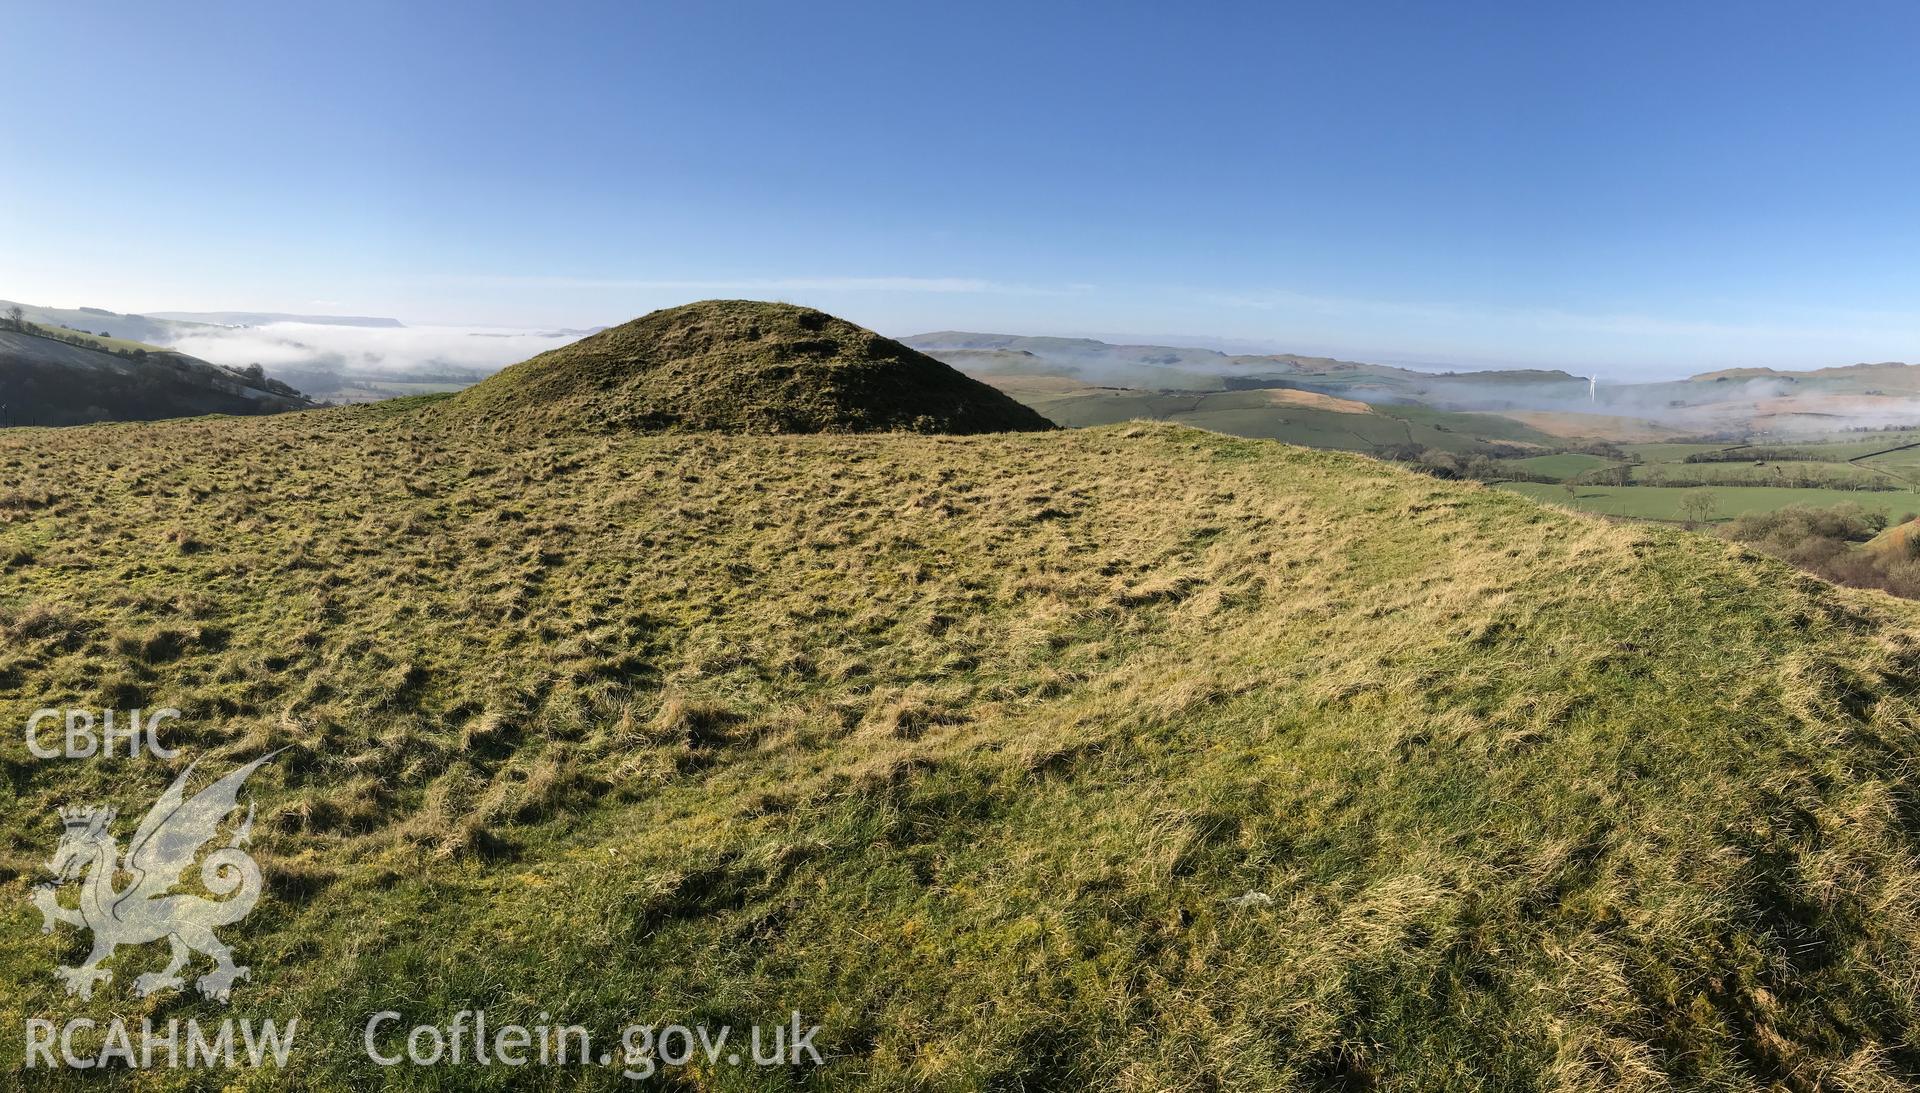 Digital colour photograph showing Castell Crug Eryr motte and bailey, New Radnor, taken by Paul Davis on 7th February 2020.